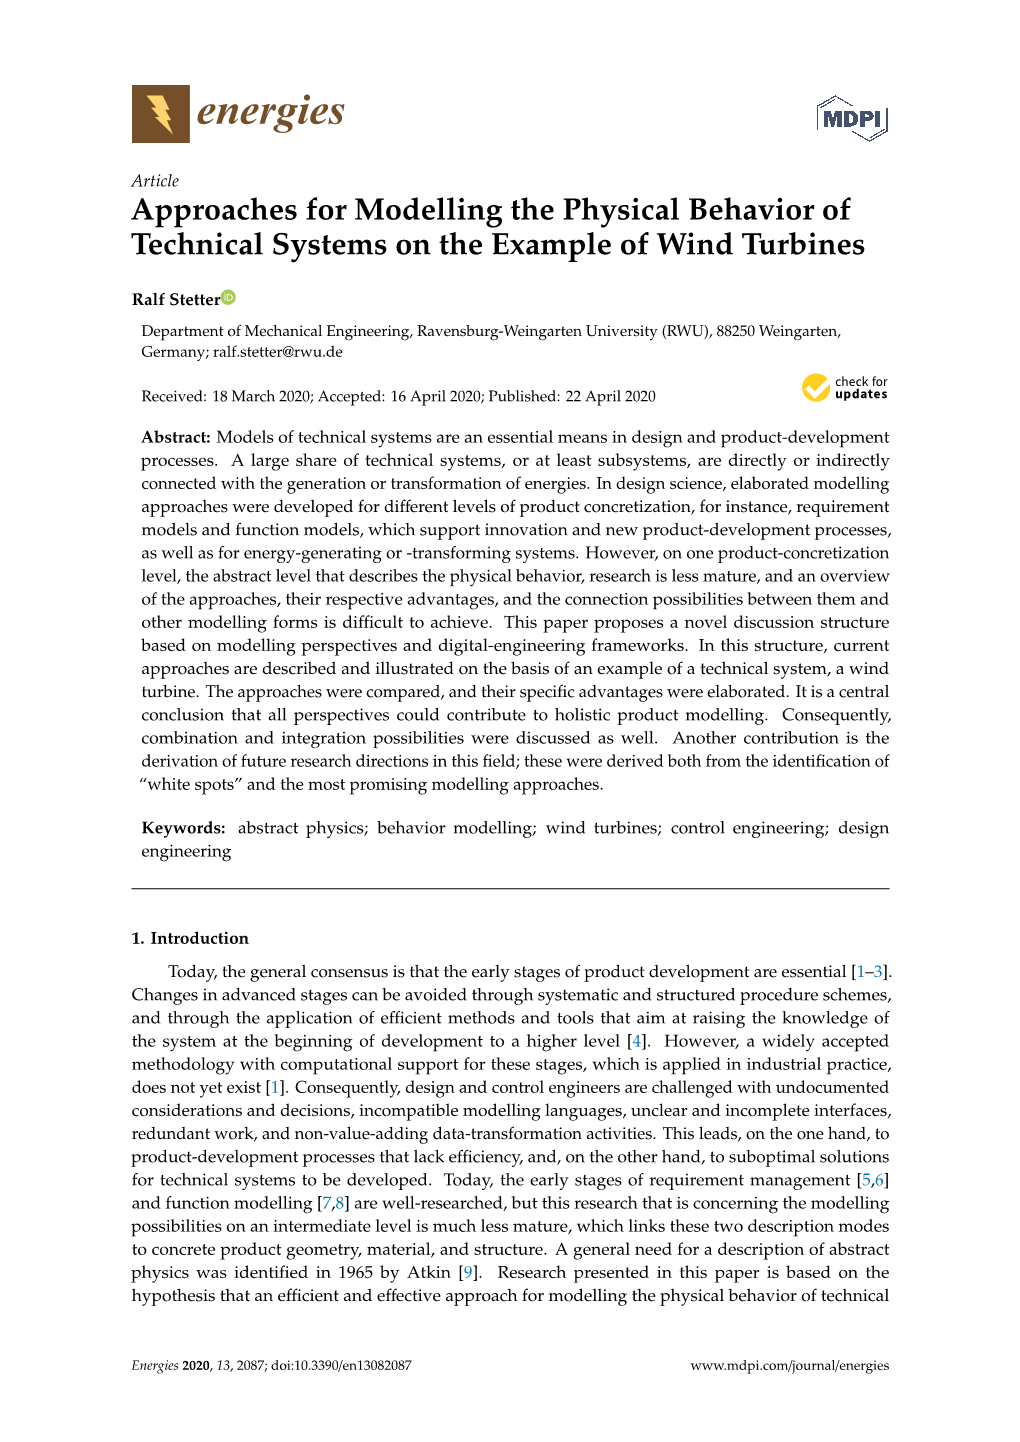 Approaches for Modelling the Physical Behavior of Technical Systems on the Example of Wind Turbines